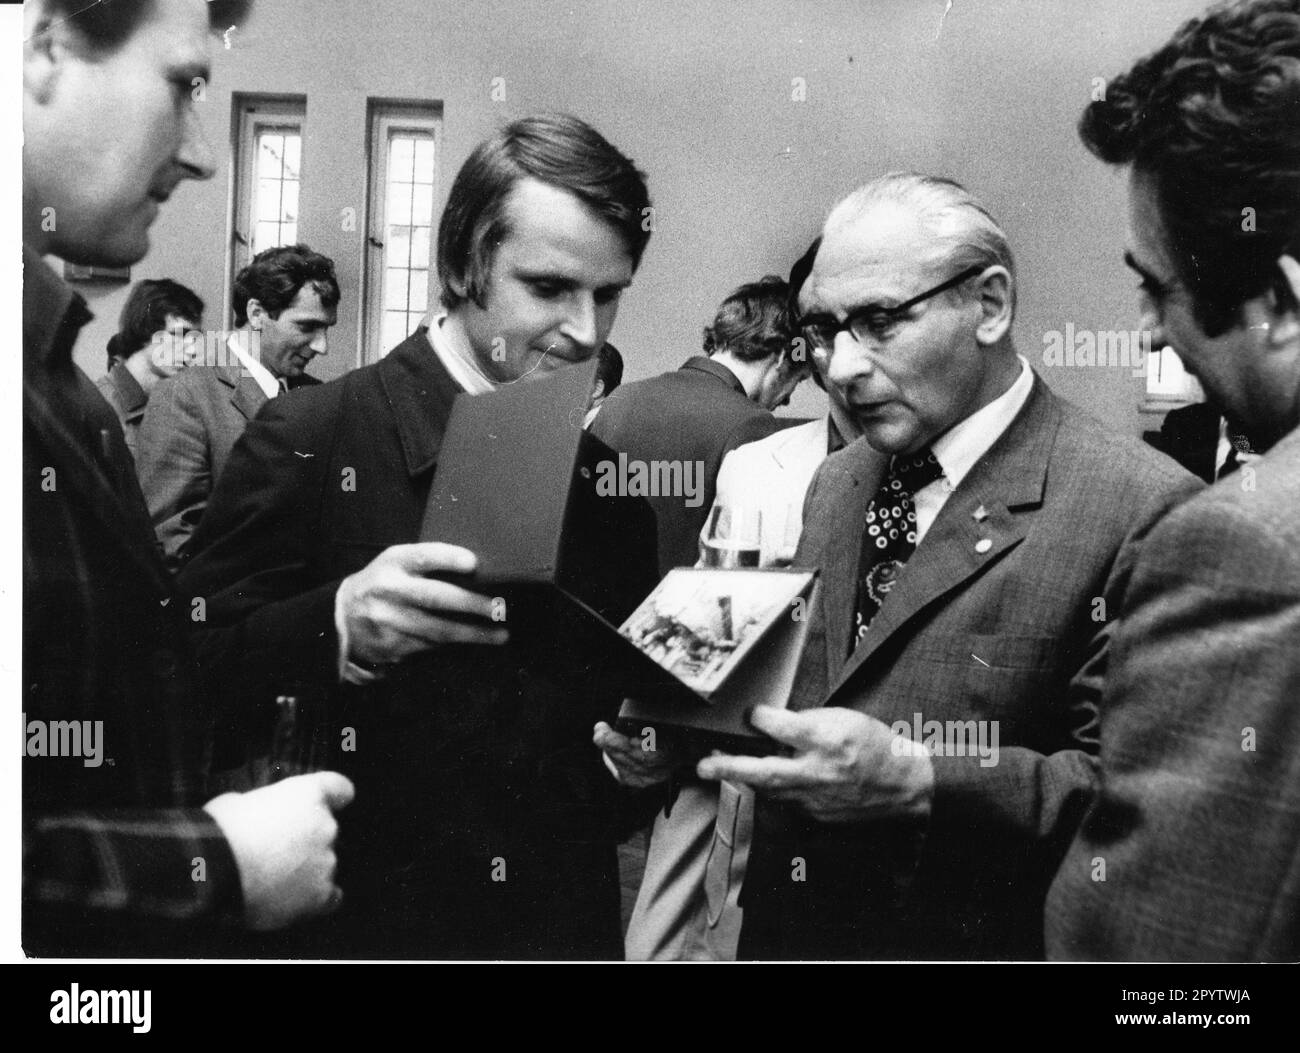 'Opening of the ''Week of Youth and Sportsmen'' in the Culture and Sports Hall in the city of Brandenburg. Central opening event of the GDR with about 2000 delegates. Opened by Paul Verner (2nd from right) member of the Politburo u. Secretary of the Central Committee of the SED, Egon Krenz, 1st Secretary of the FDJ Günther Jahn, 1st Secretary of the district leadership Potsdam of the SED. Ceremonial event. Event. GDR. historical. Photo: MAZ/Bruno Wernitz,29.05.1976 [automated translation]' Stock Photo